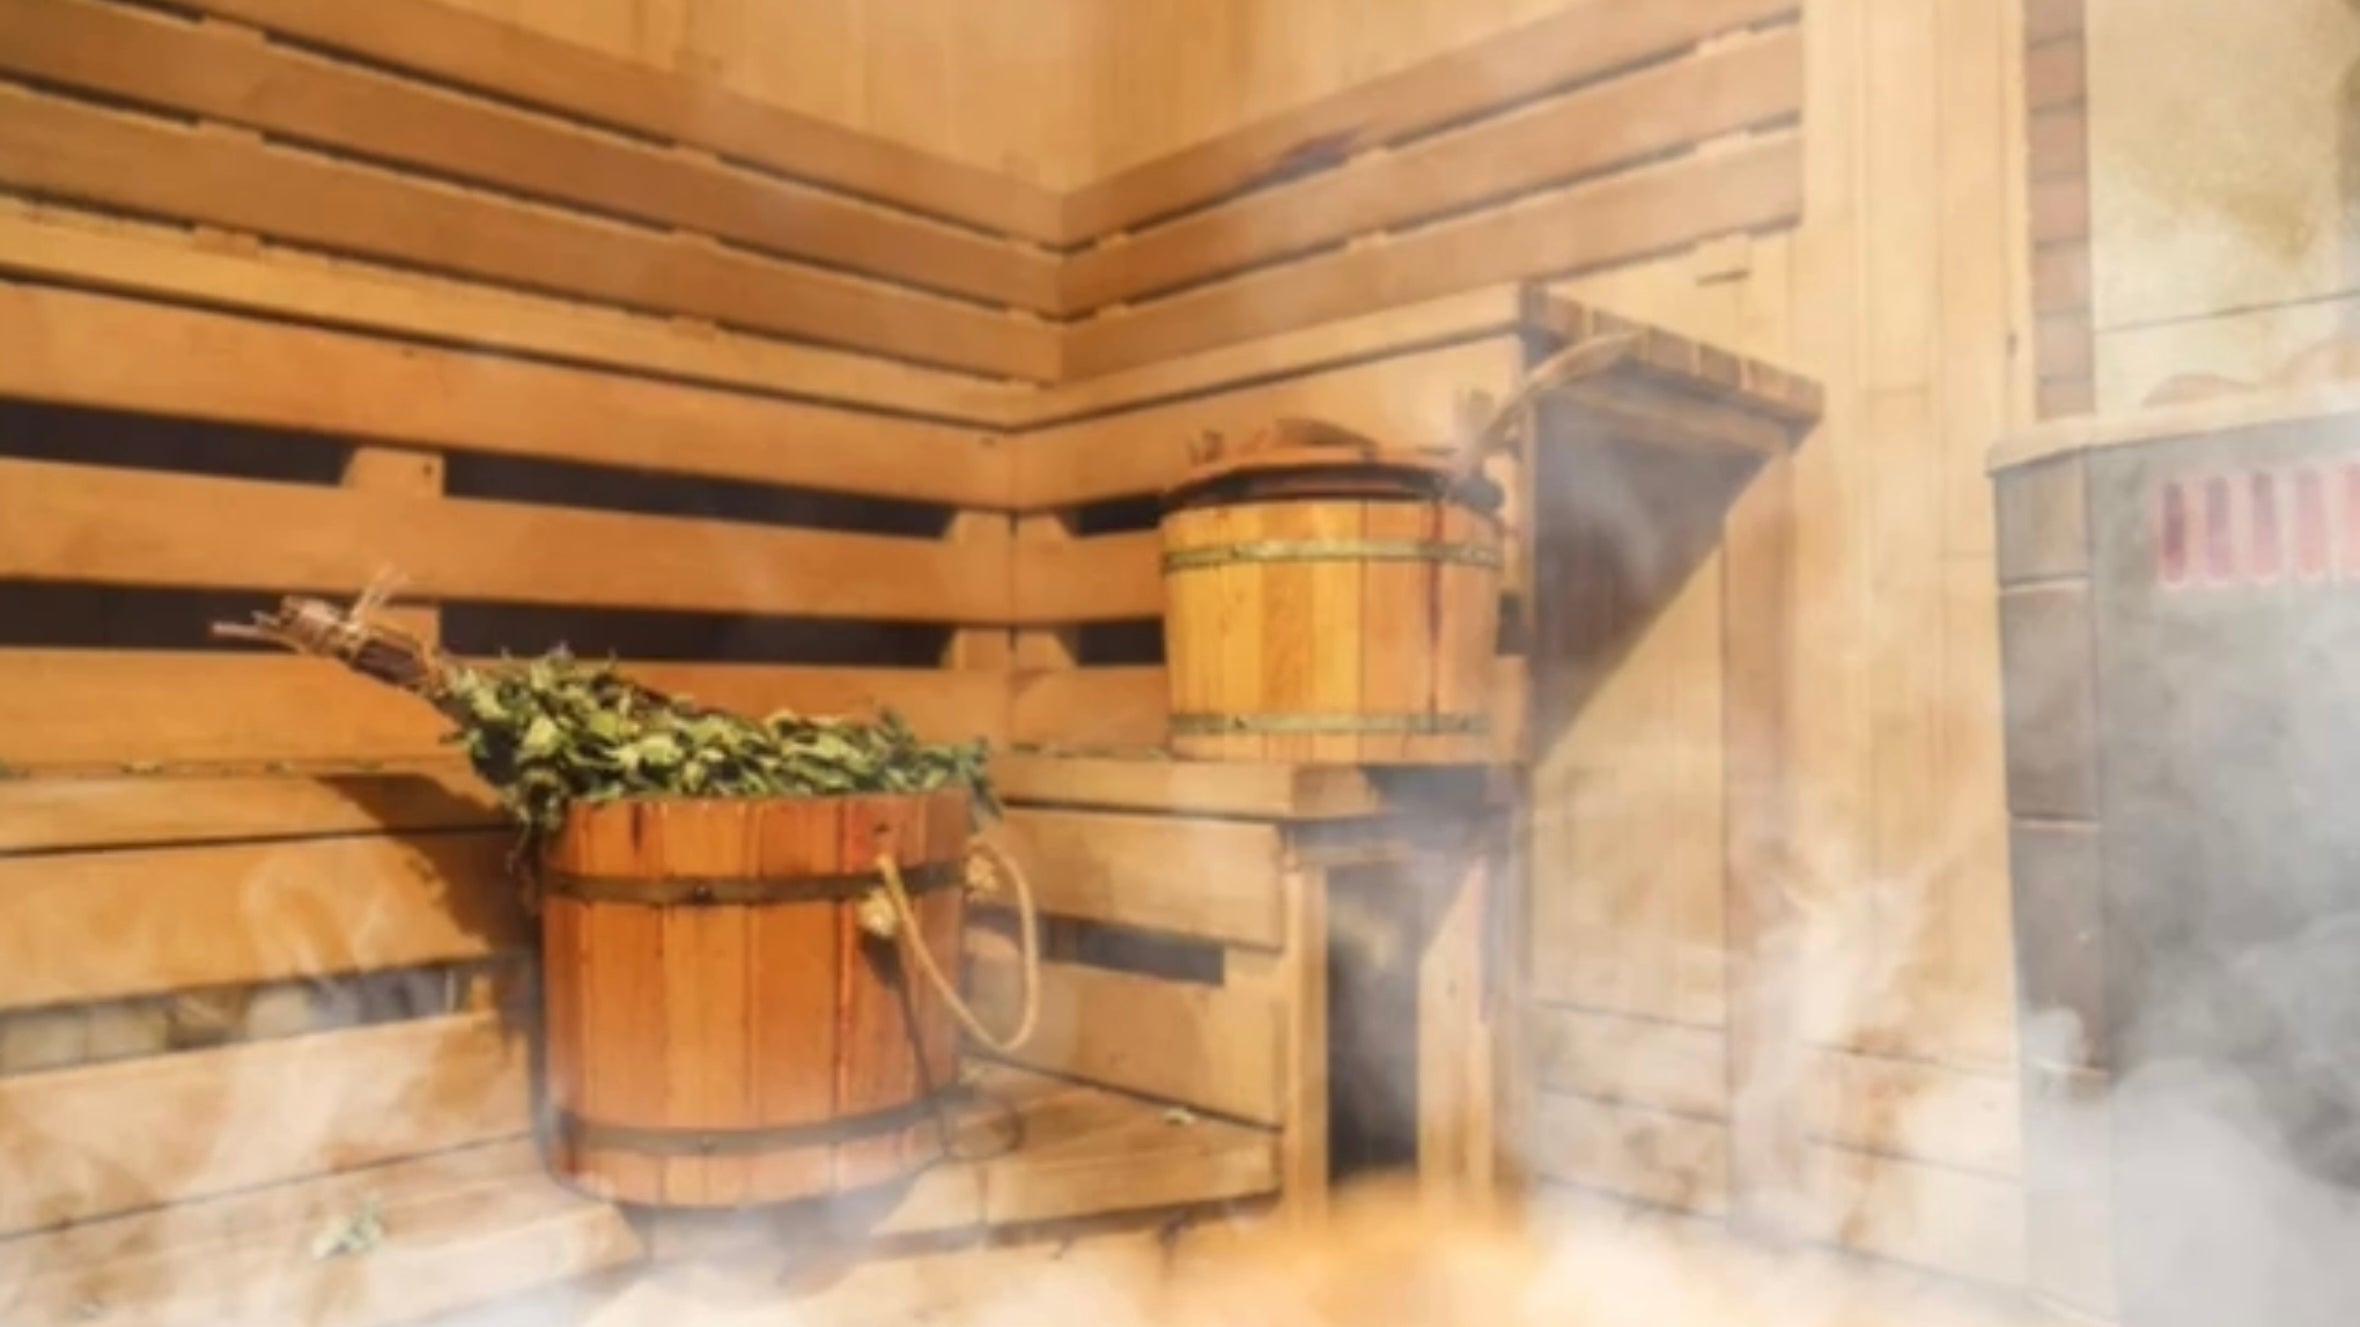 The Rich Tradition of Sauna Culture: Part 2